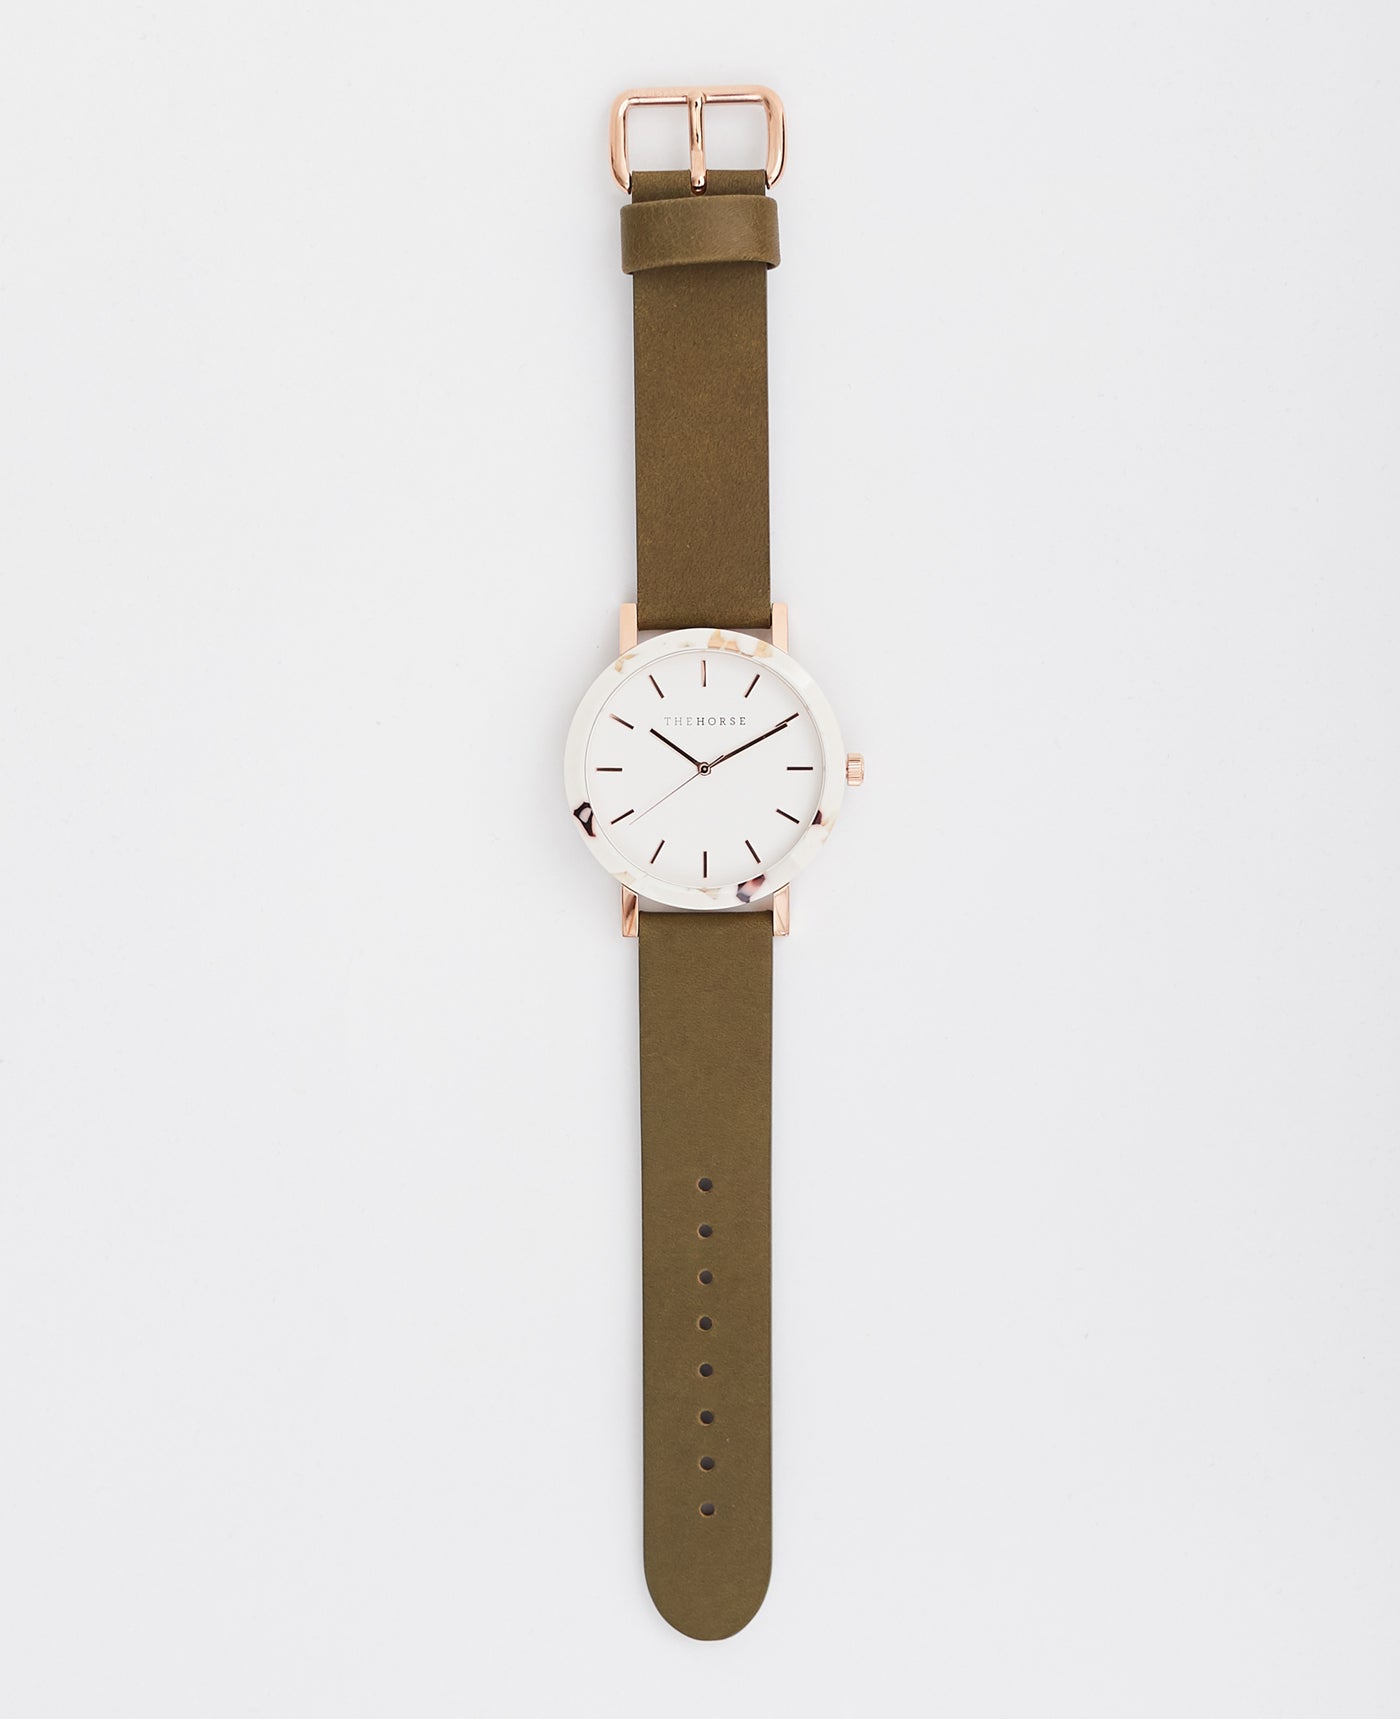 The Resin Women's Watch in Nougat Case / White Dial / Rose Gold Indexing / Olive Leather Strap by The Horse